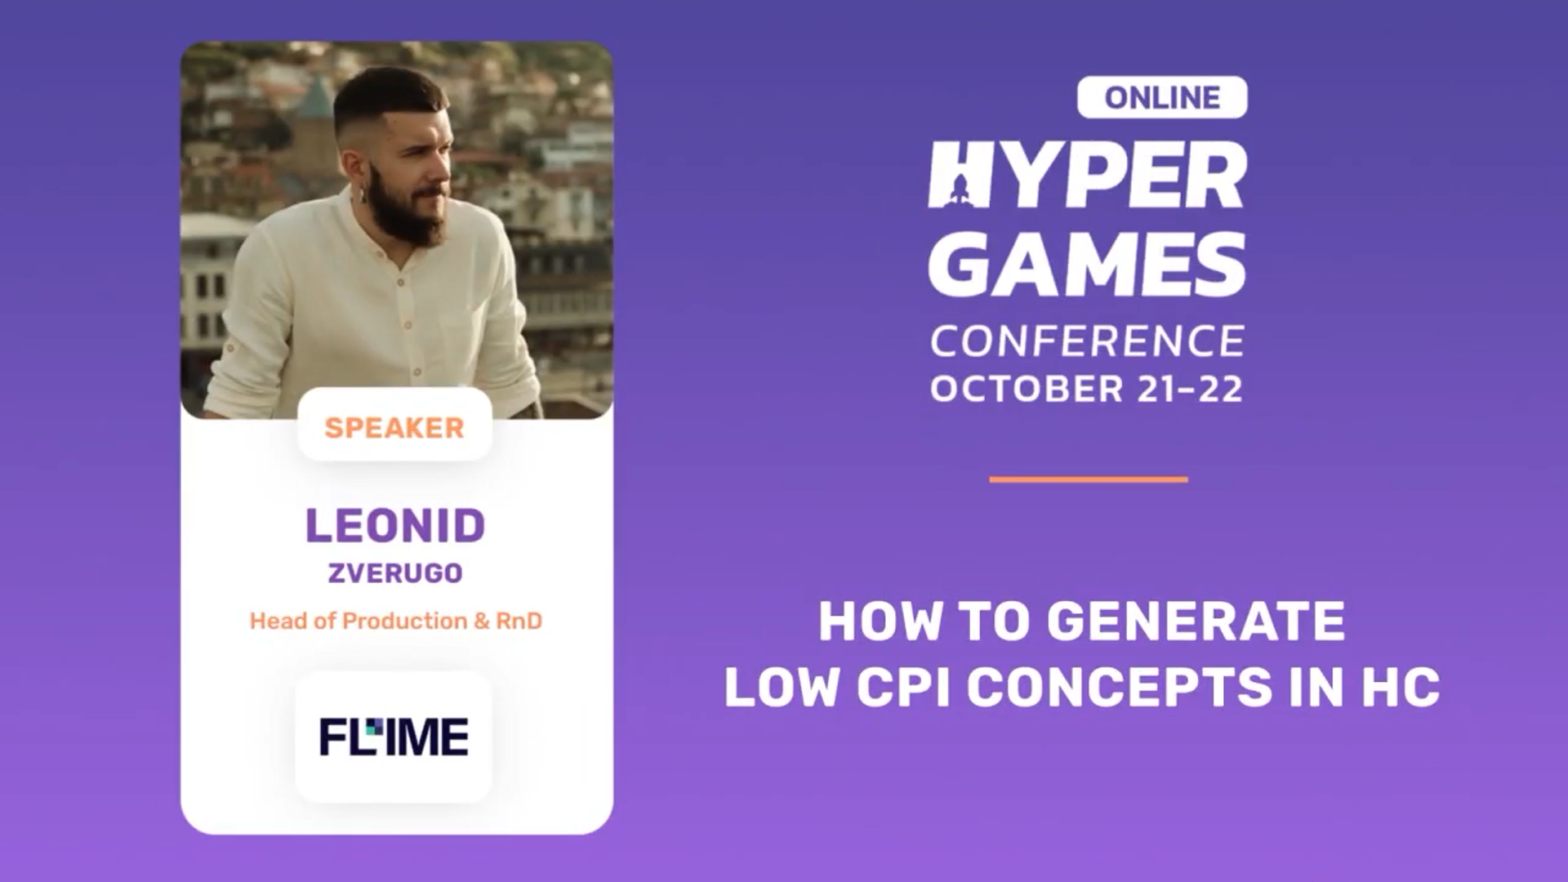  How to generate low CPI concepts in hyper-casual games